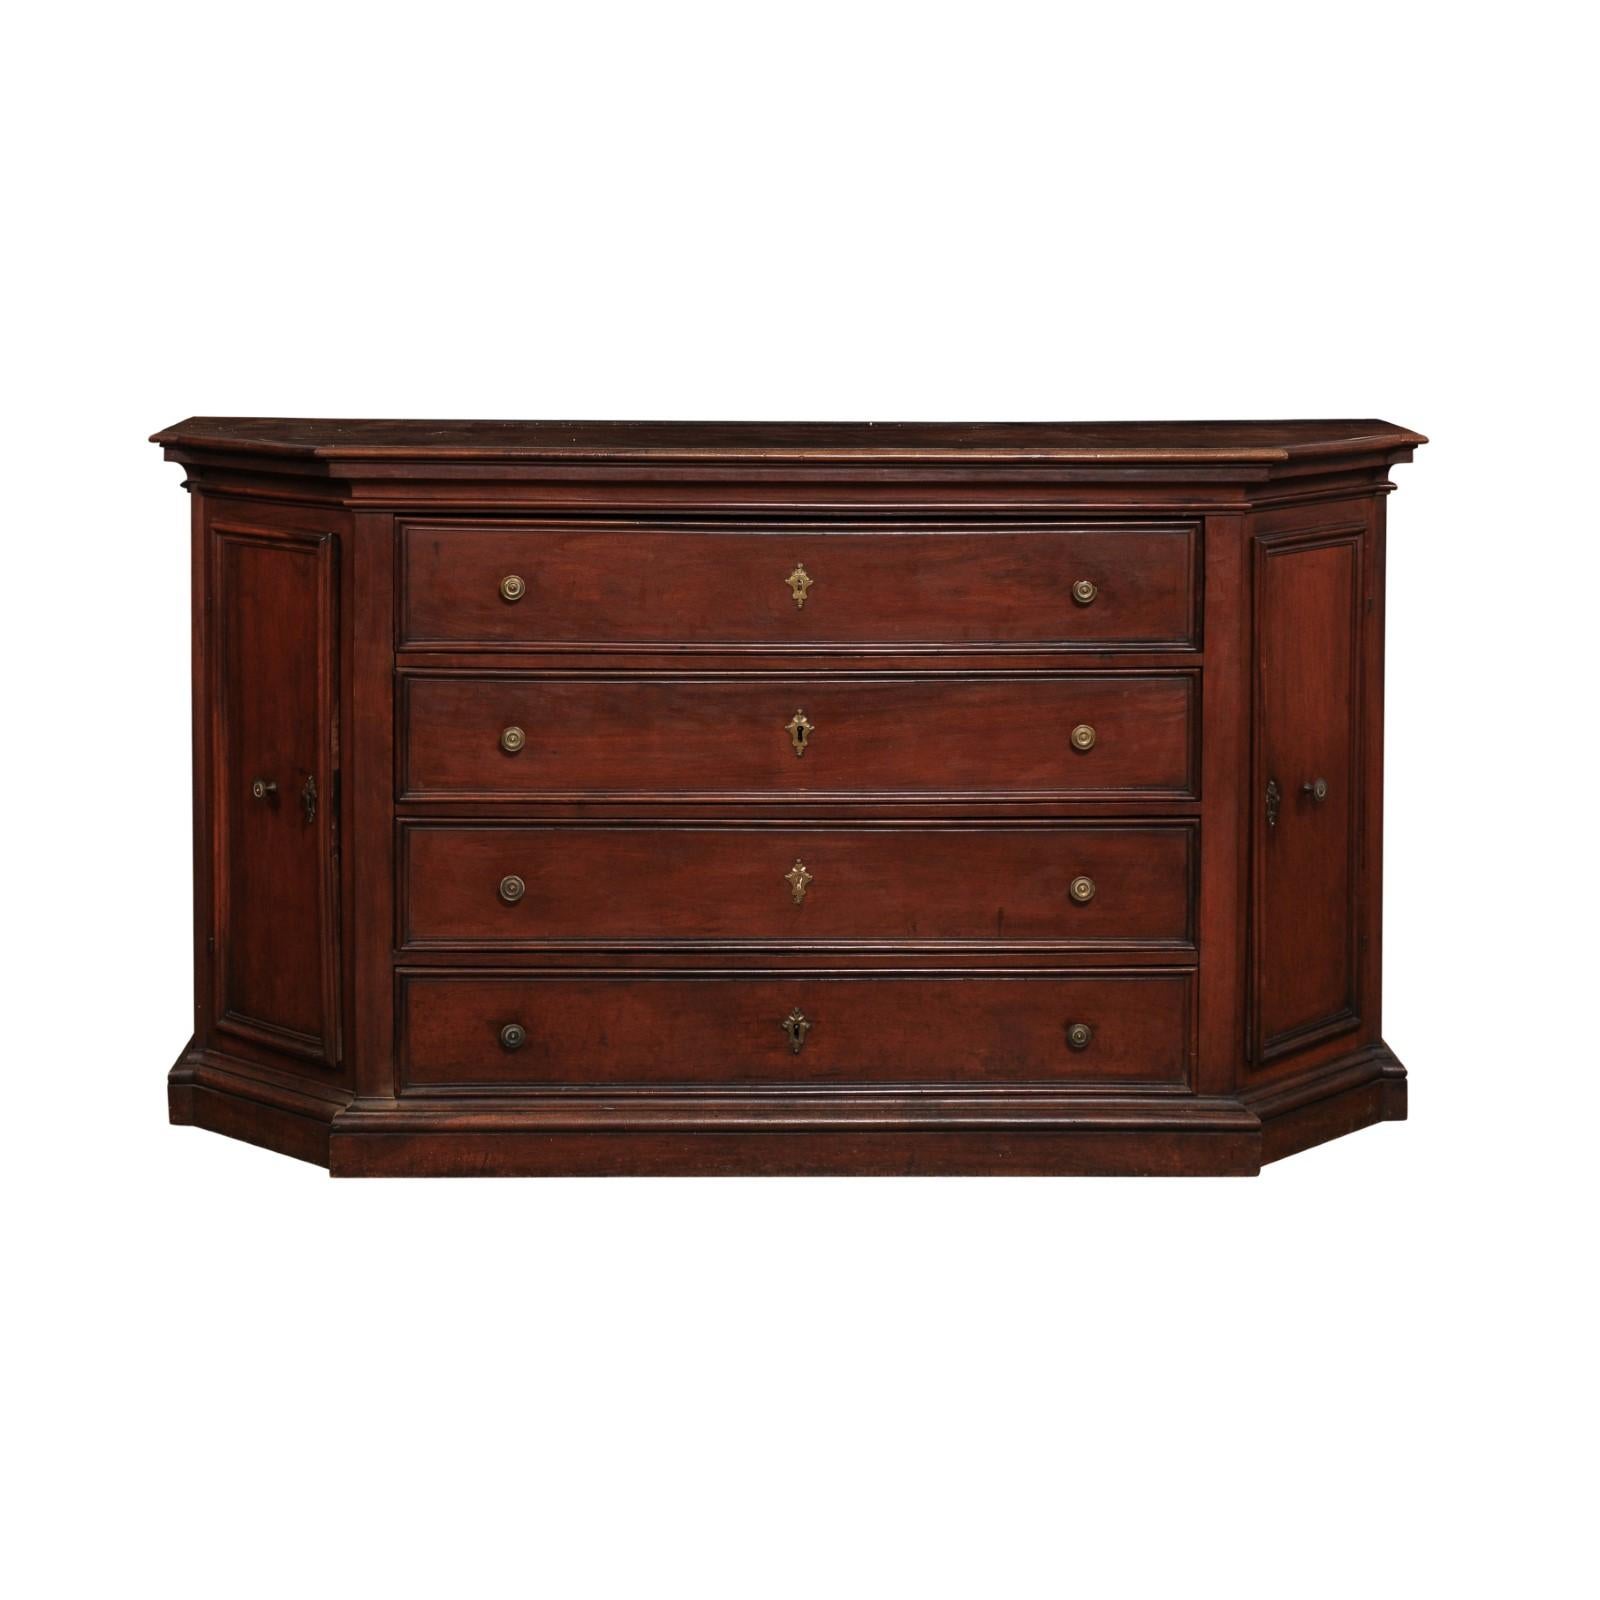 An Italian walnut dresser from the 17th century with four drawers, protruding front, canted sides with doors, bronze hardware, molded accents and rustic character. This exquisite Italian walnut dresser from the 17th century is a true embodiment of